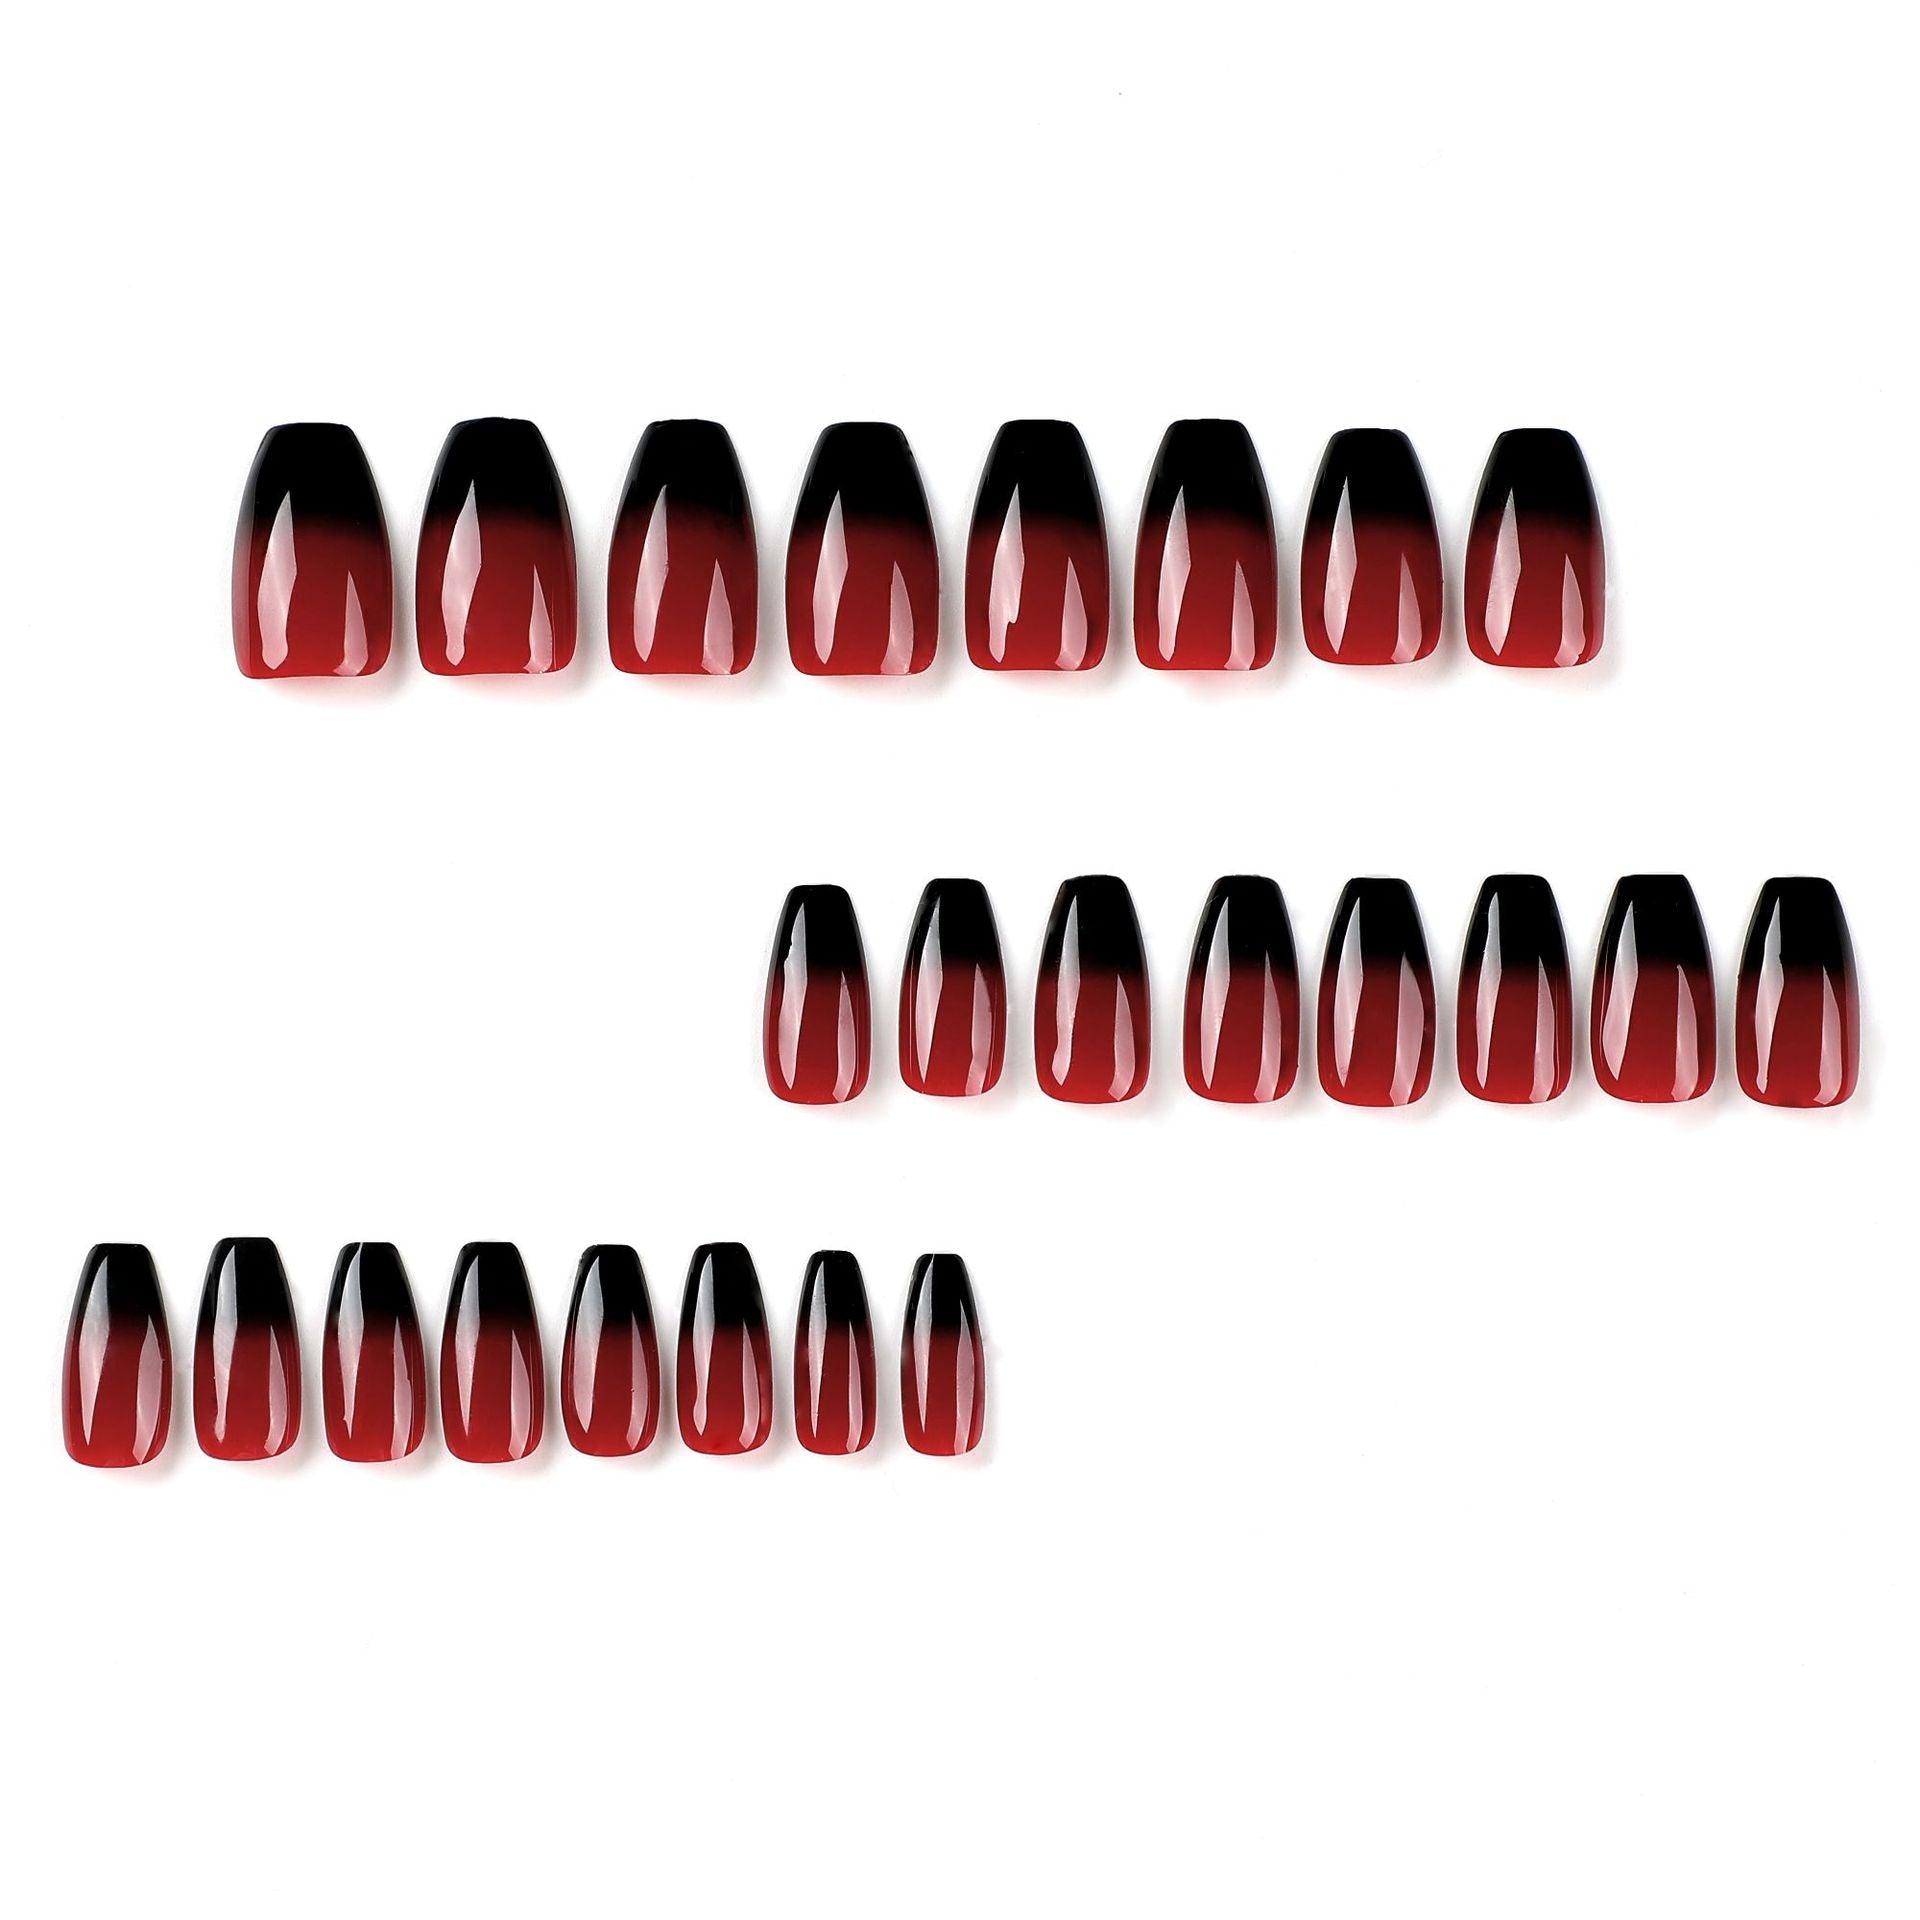 Glamour Black and Red Ombre Medium Length Press On Nails – Belle Rose Nails